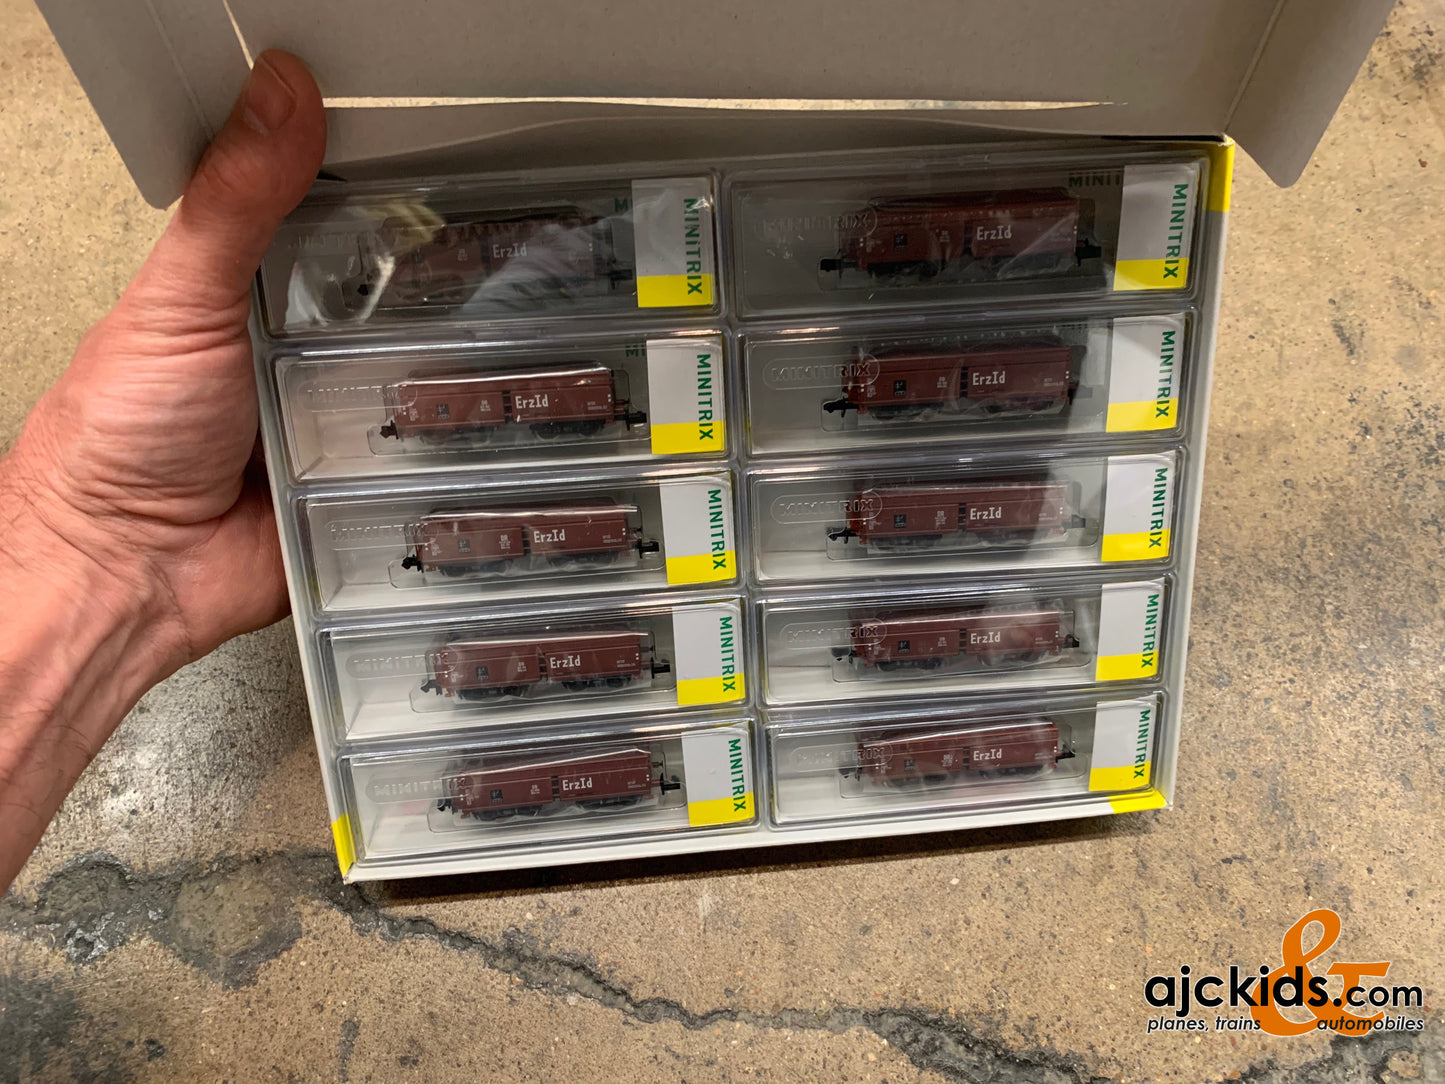 Trix 15449 - Display with 10 Type Erz Id Hopper Cars